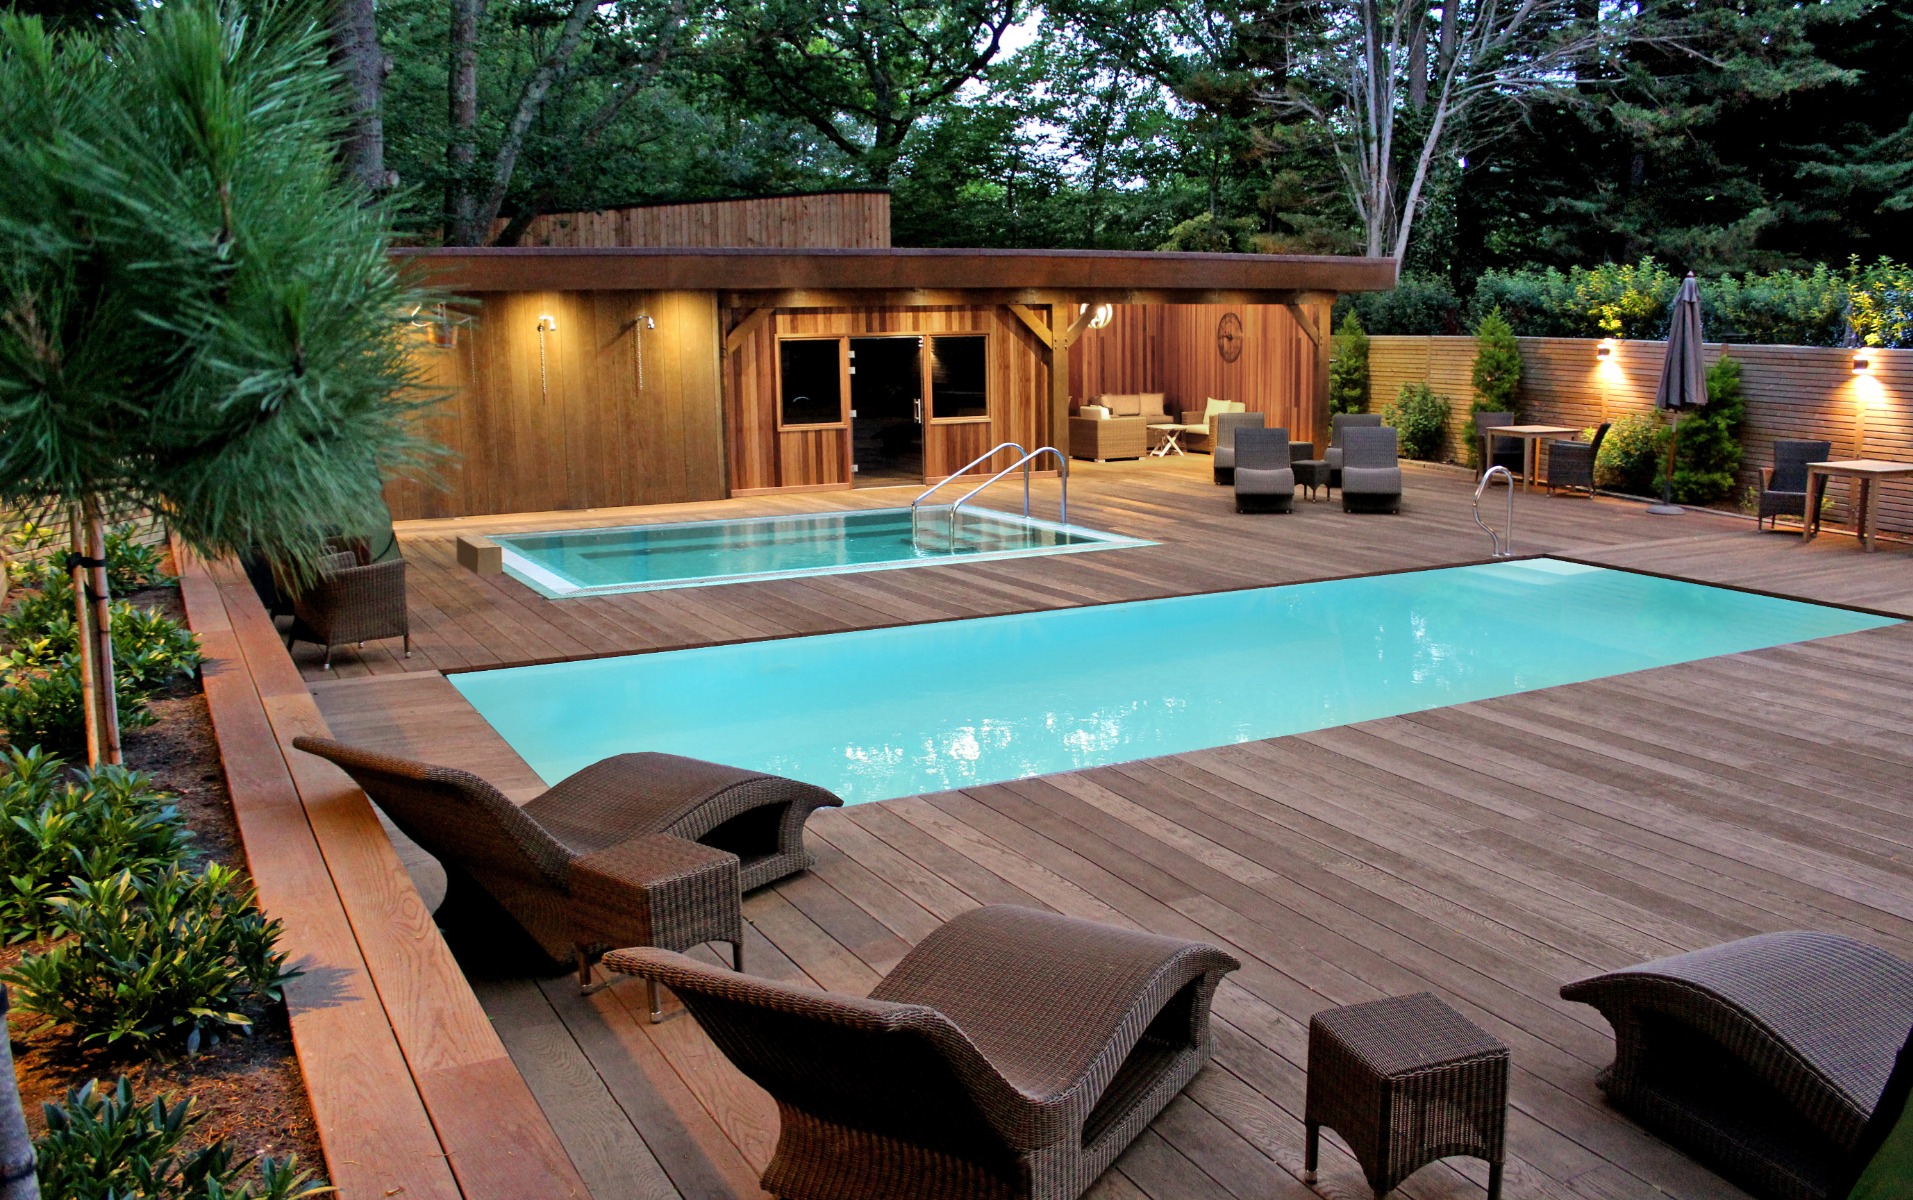 Outdoor pool and spa at Wickwoods Country Club